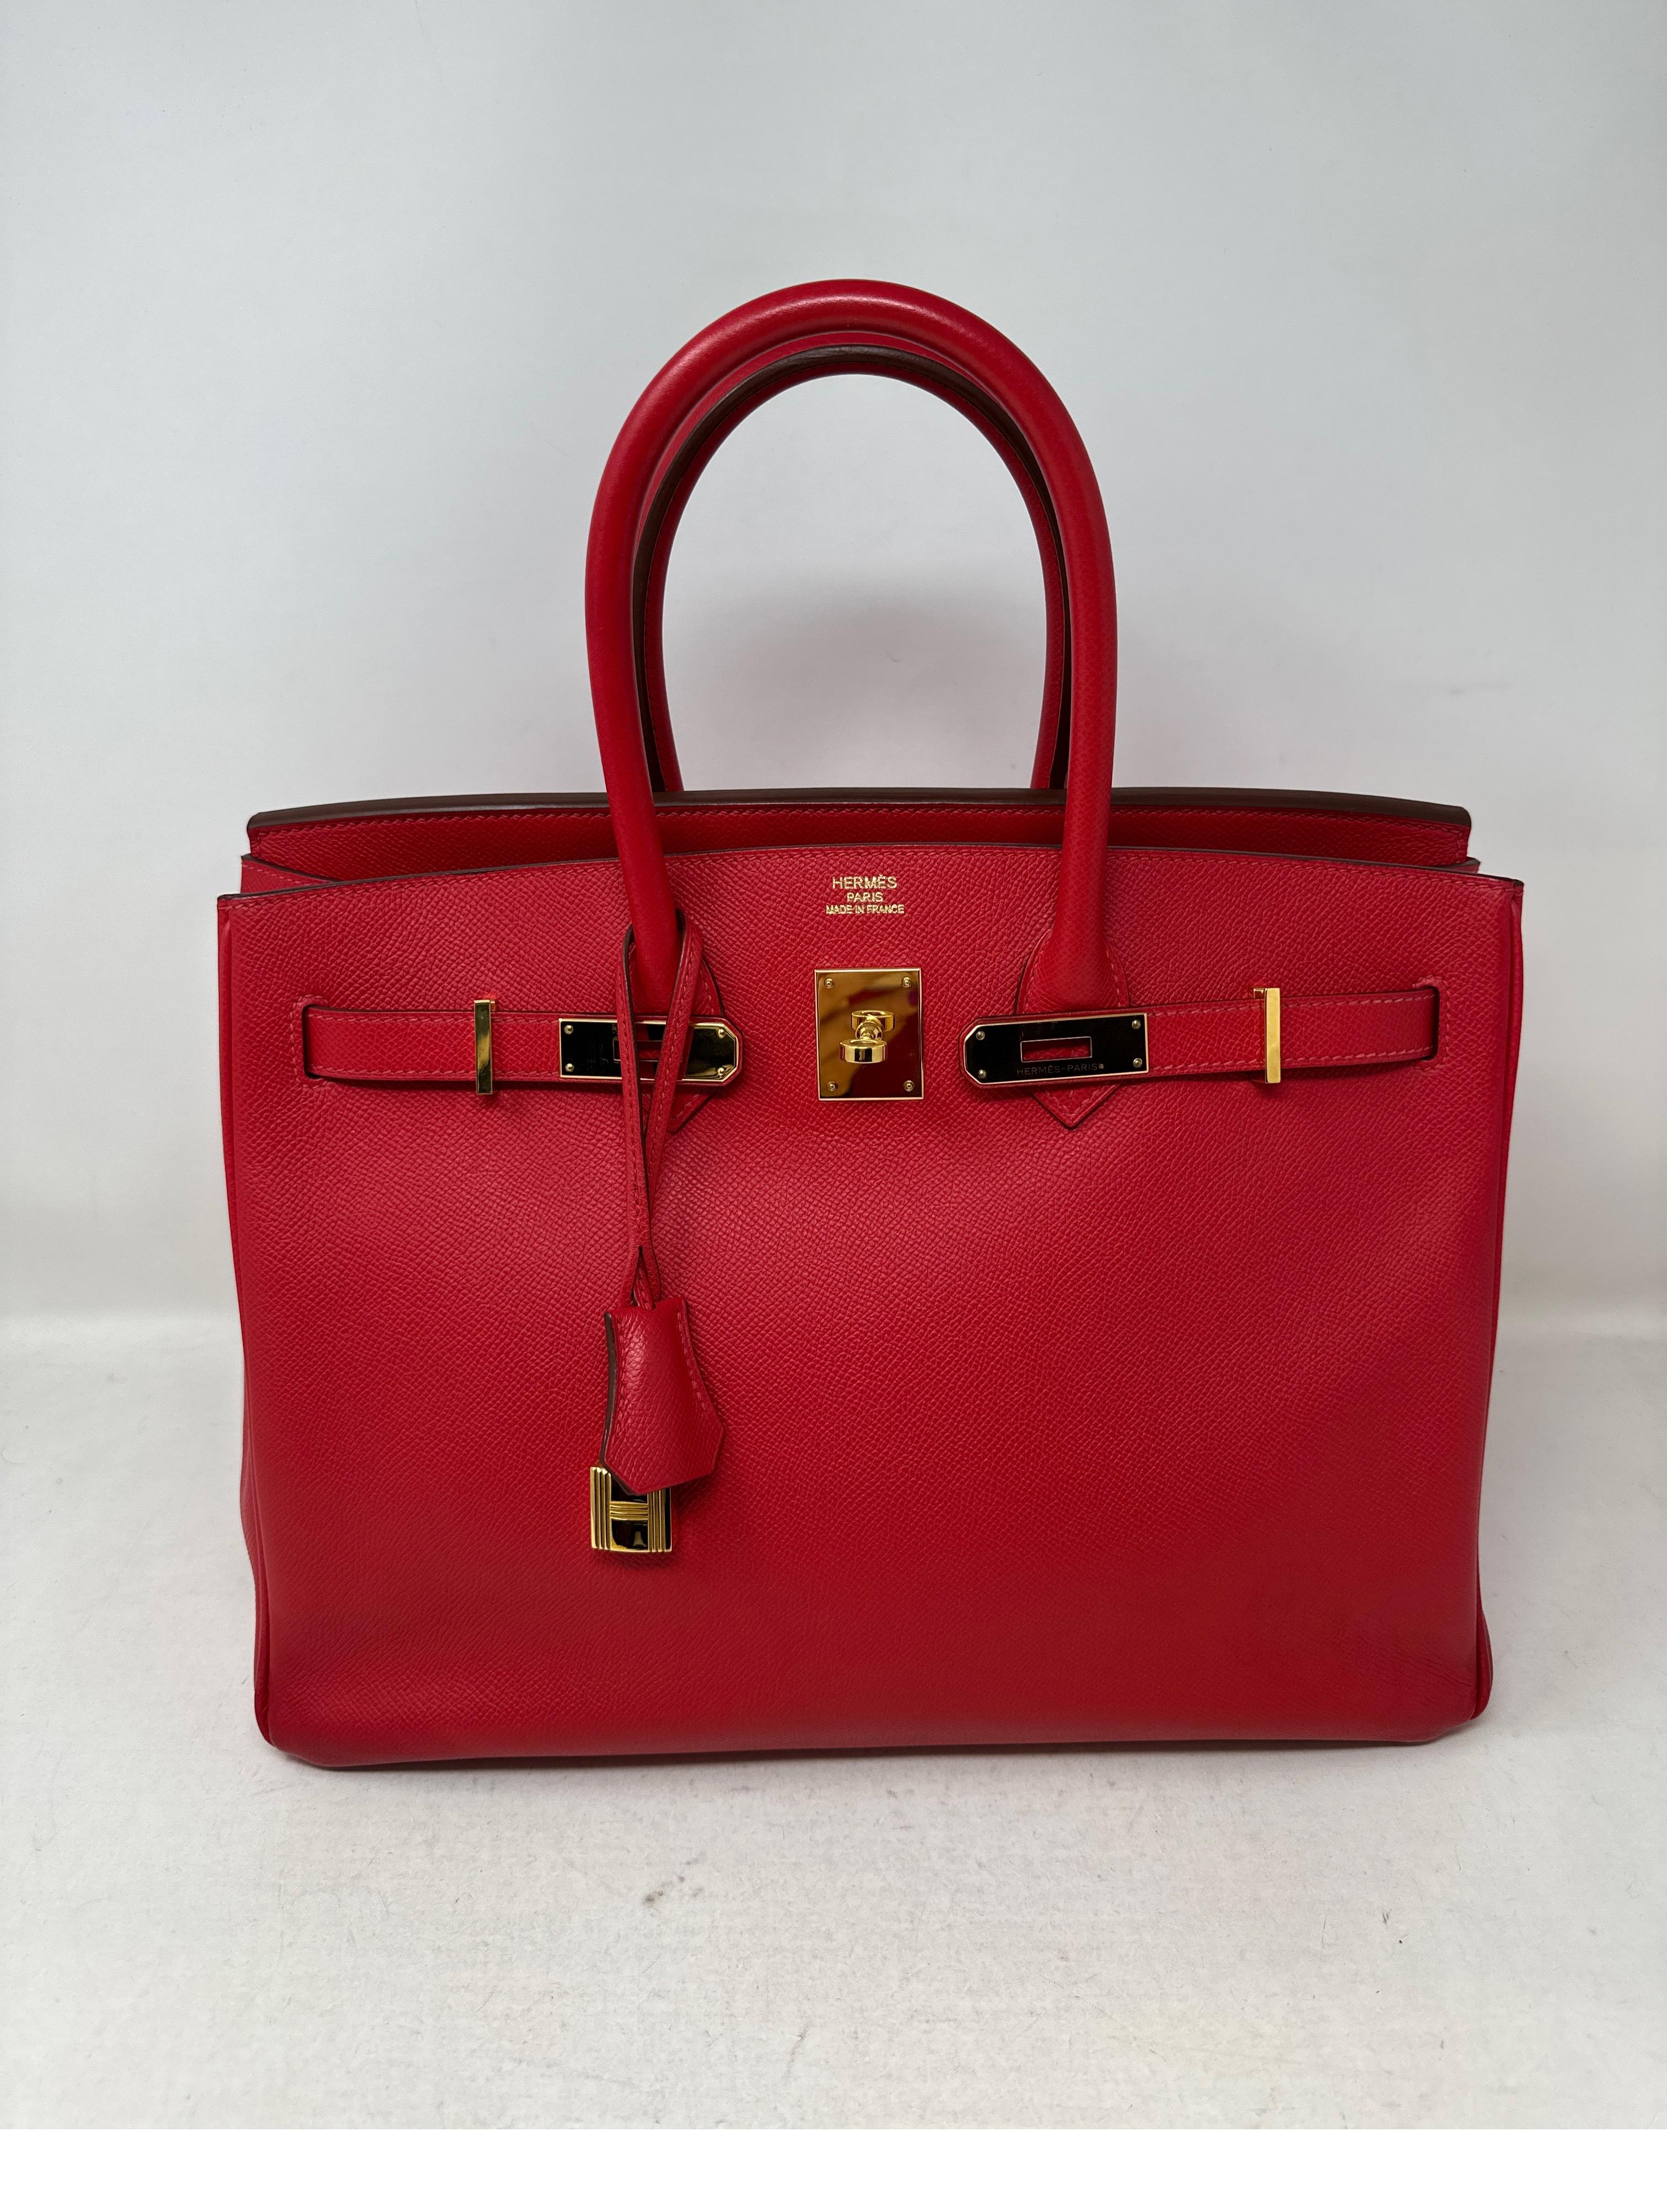 Hermes Rouge Casaque Birkin 30 Bag. Gold hardware. Good condition. Epsom leather. Interior clean. Most wanted red color. Includes clochette, lock, keys, and dust bag. Guaranteed authentic. 